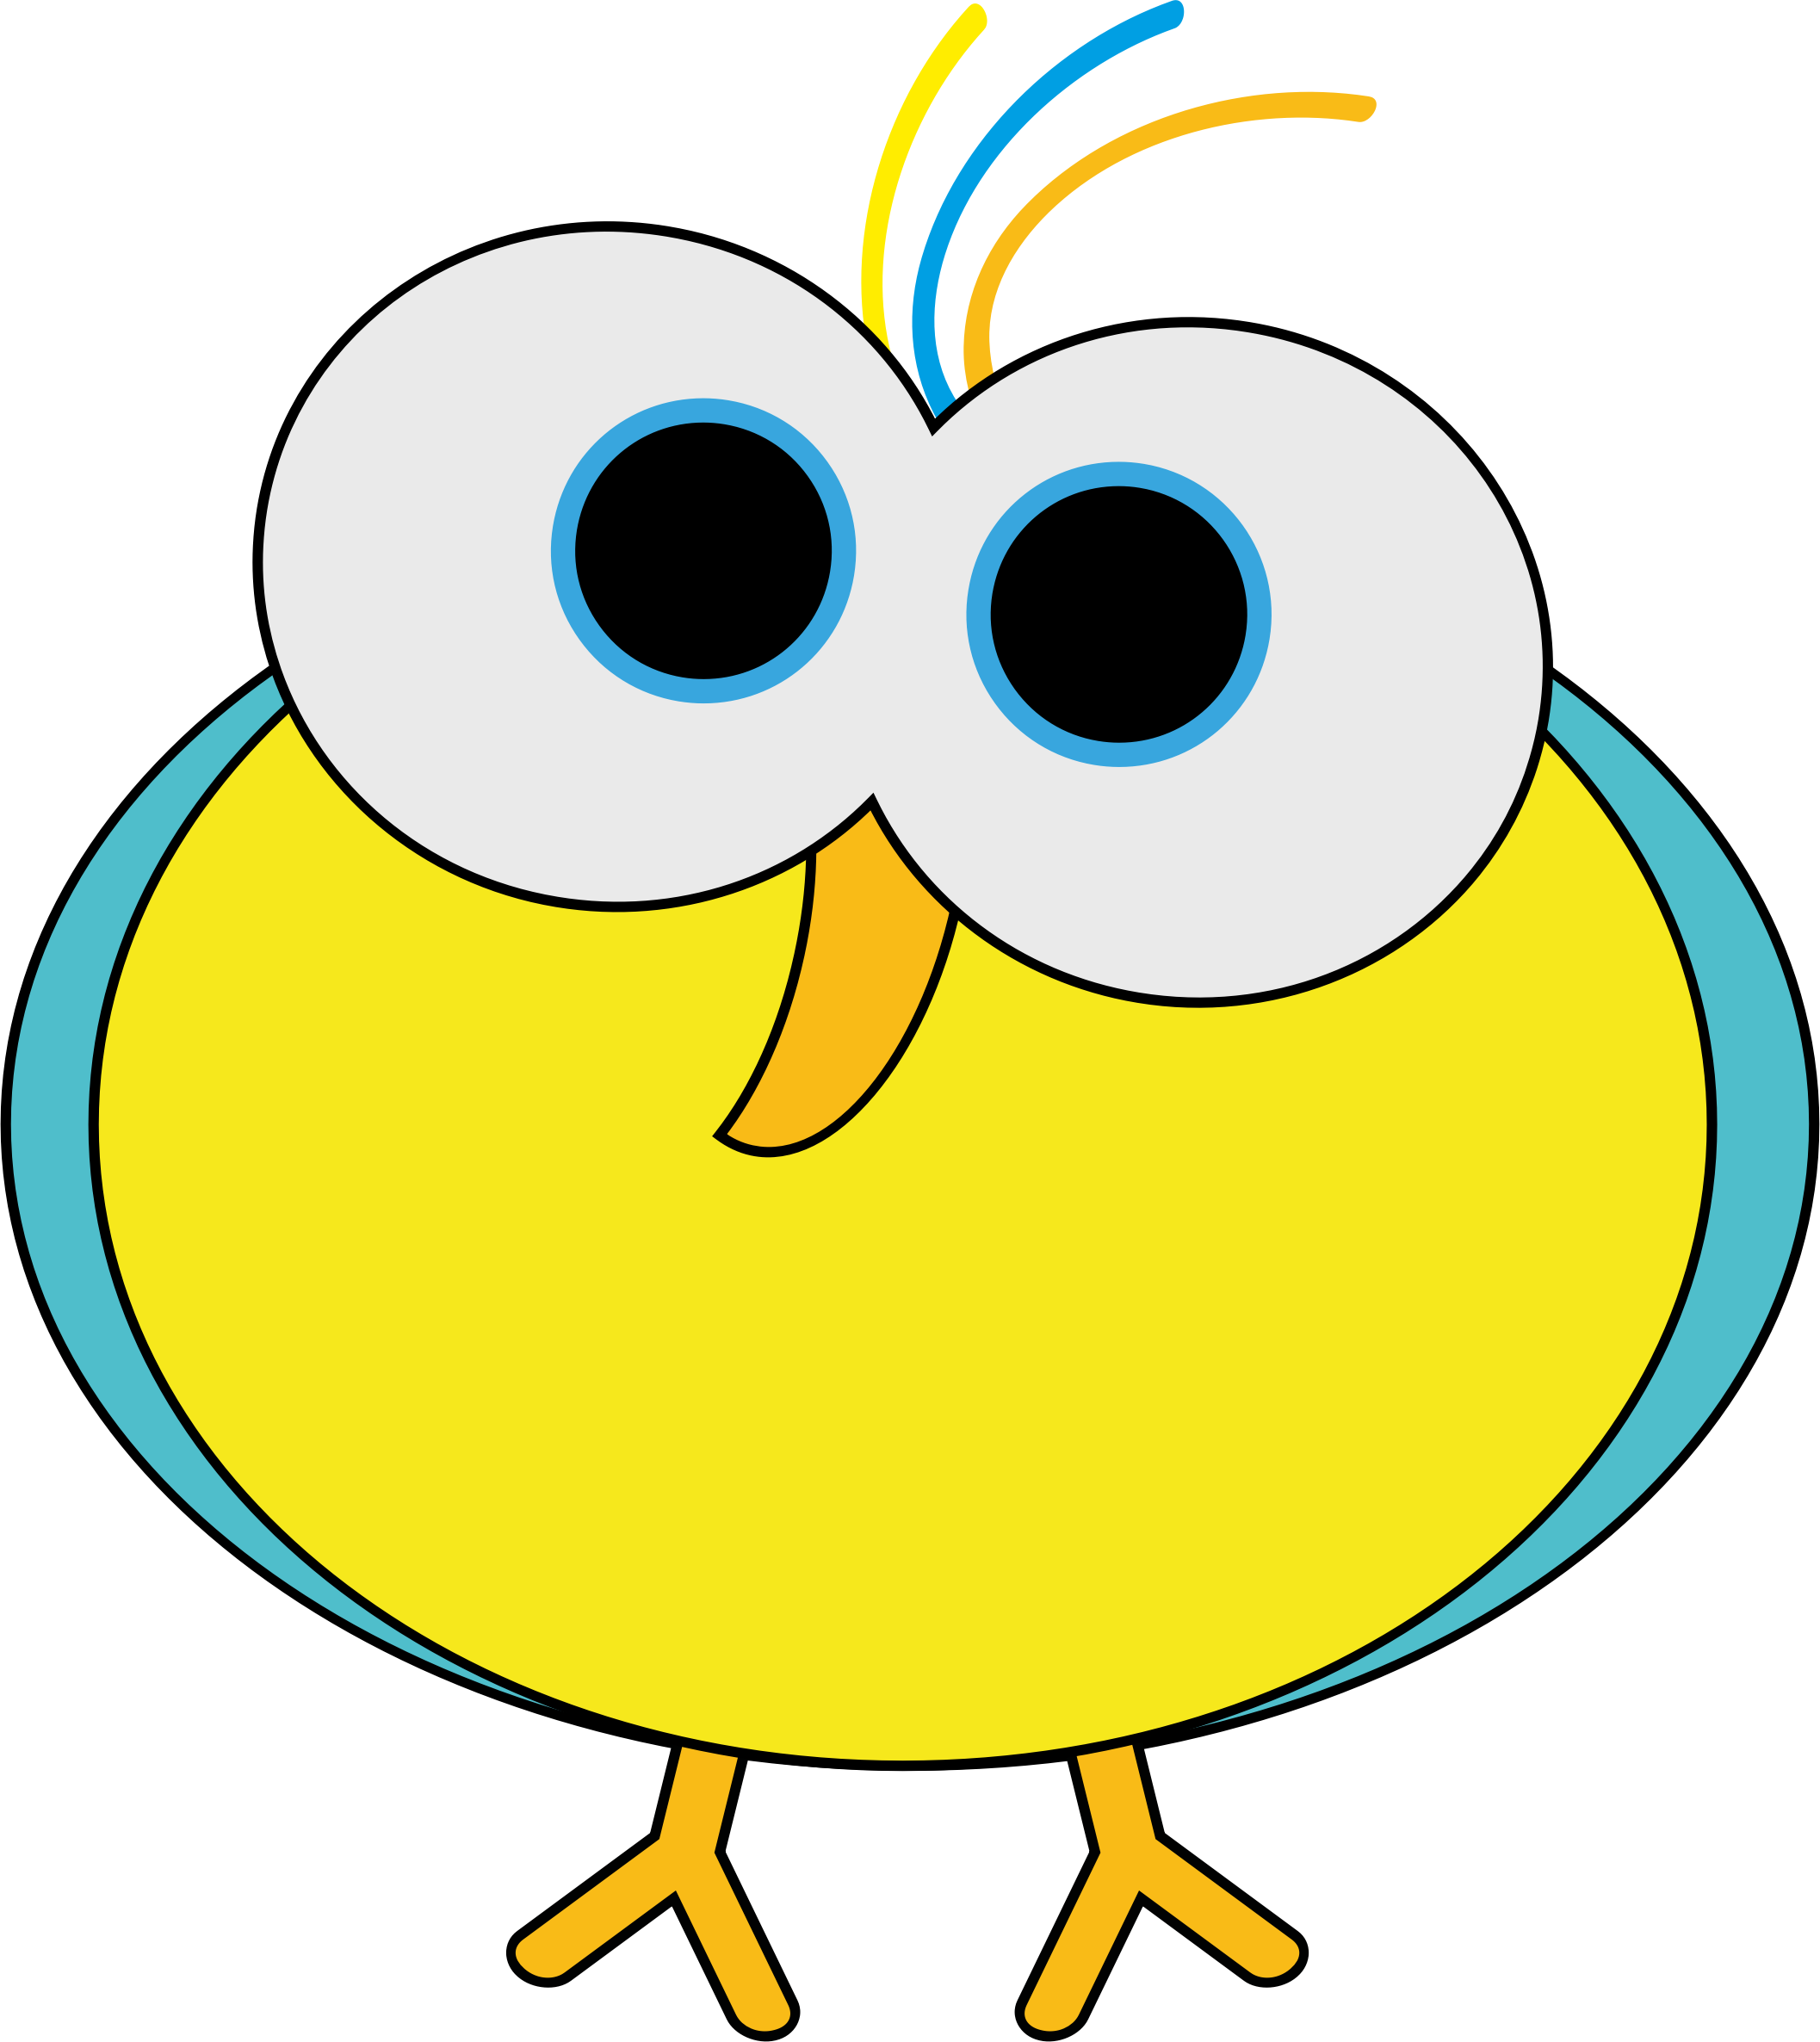 Download Birdie with Big Eyes Vector Clipart image - Free stock photo - Public Domain photo - CC0 Images